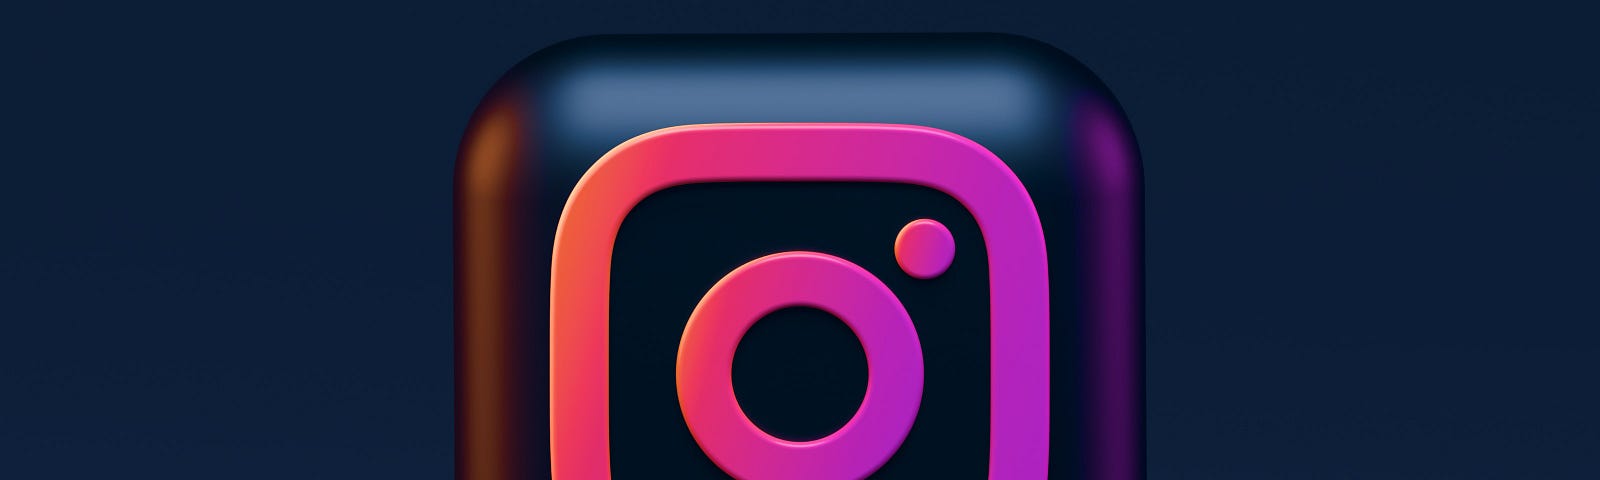 Dark theme instagram logo with blue and pink squares